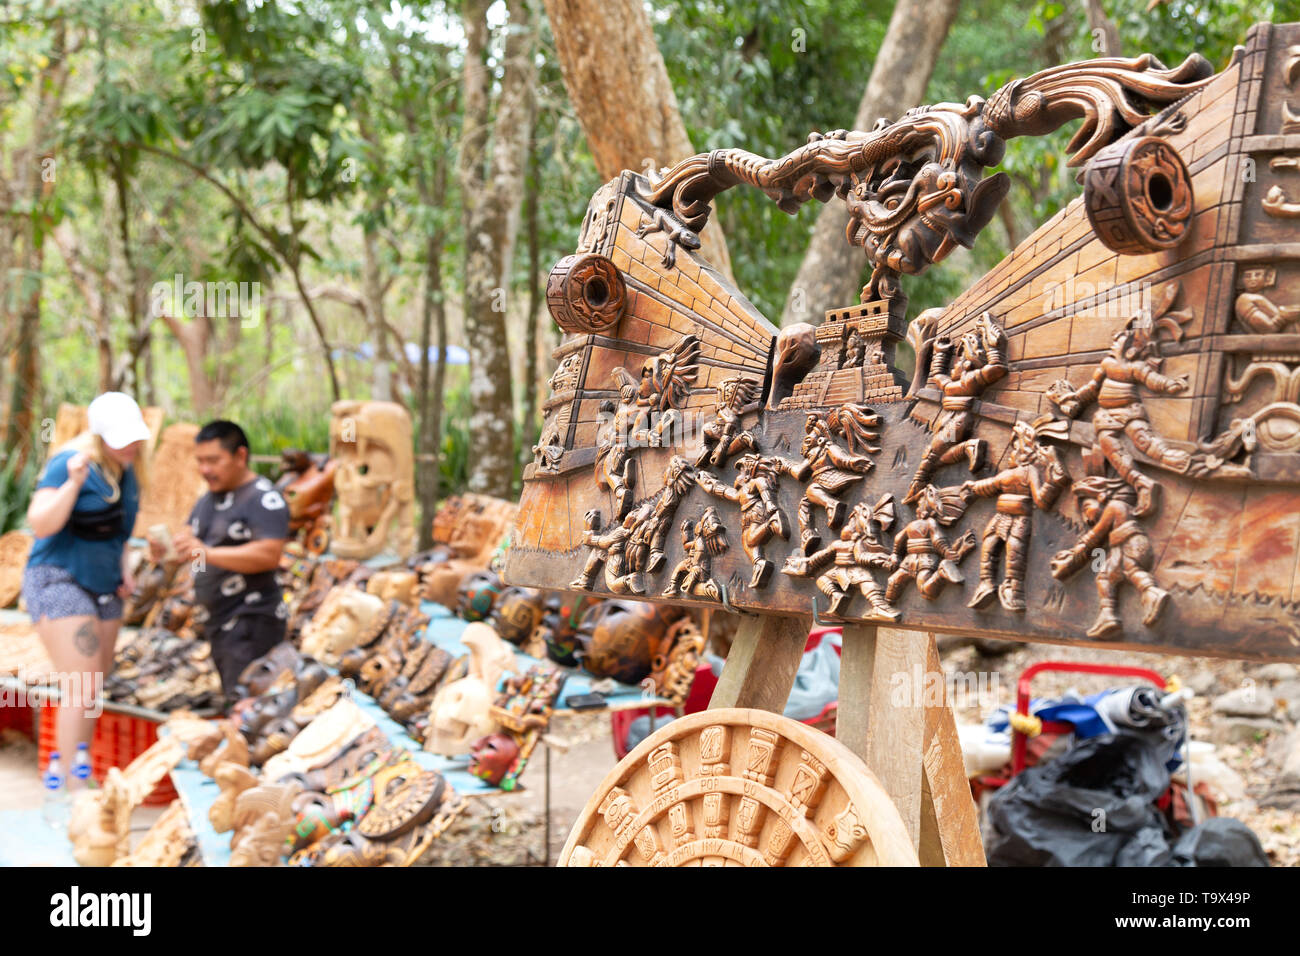 Mexico crafts: a tourist shopping at a craft stall for travel souvenirs and gifts, Chichen Itza, Yucatan Mexico Latin America Stock Photo